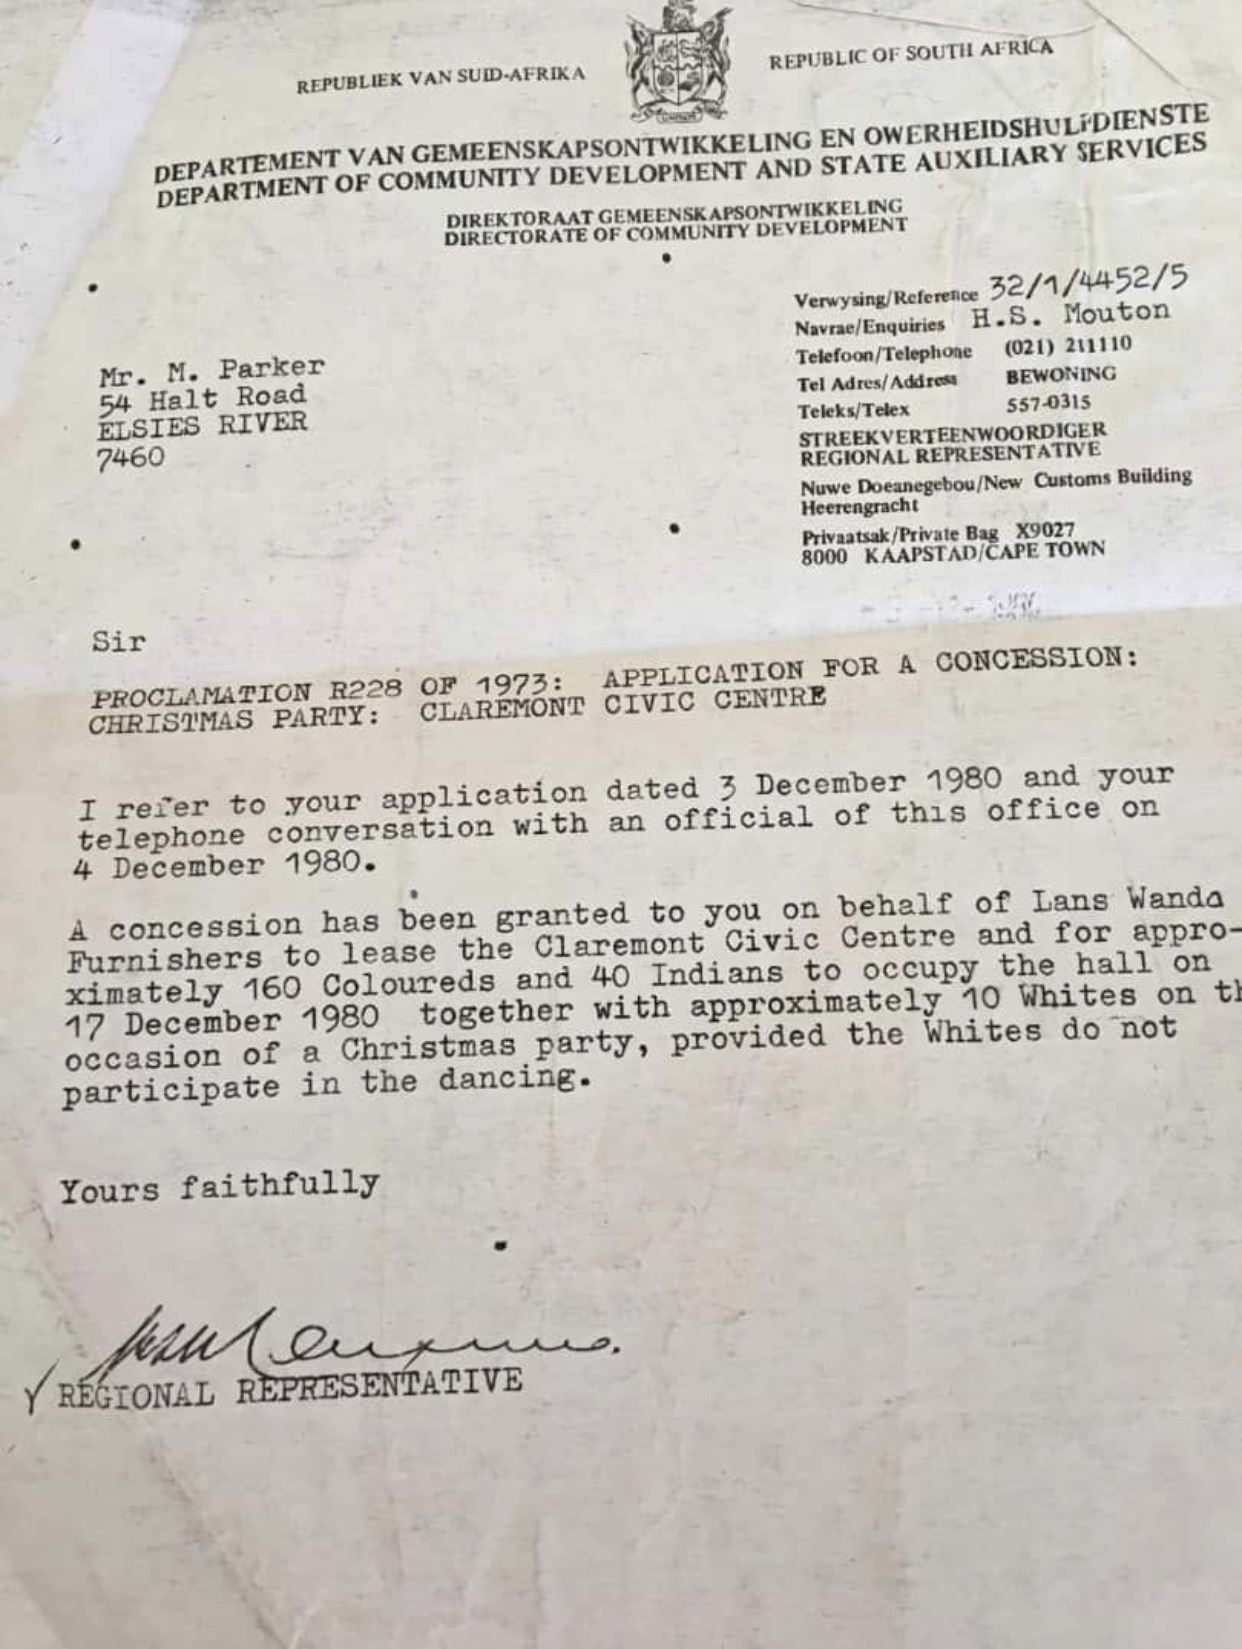 Image of letter from South African "Department of Community Development and State Auxiliary Services" in 1980 granting permission for a Christmas party with "160 Coloureds, 40 Indians, and 10 Whites" as long as the "Whites" don't dance. 